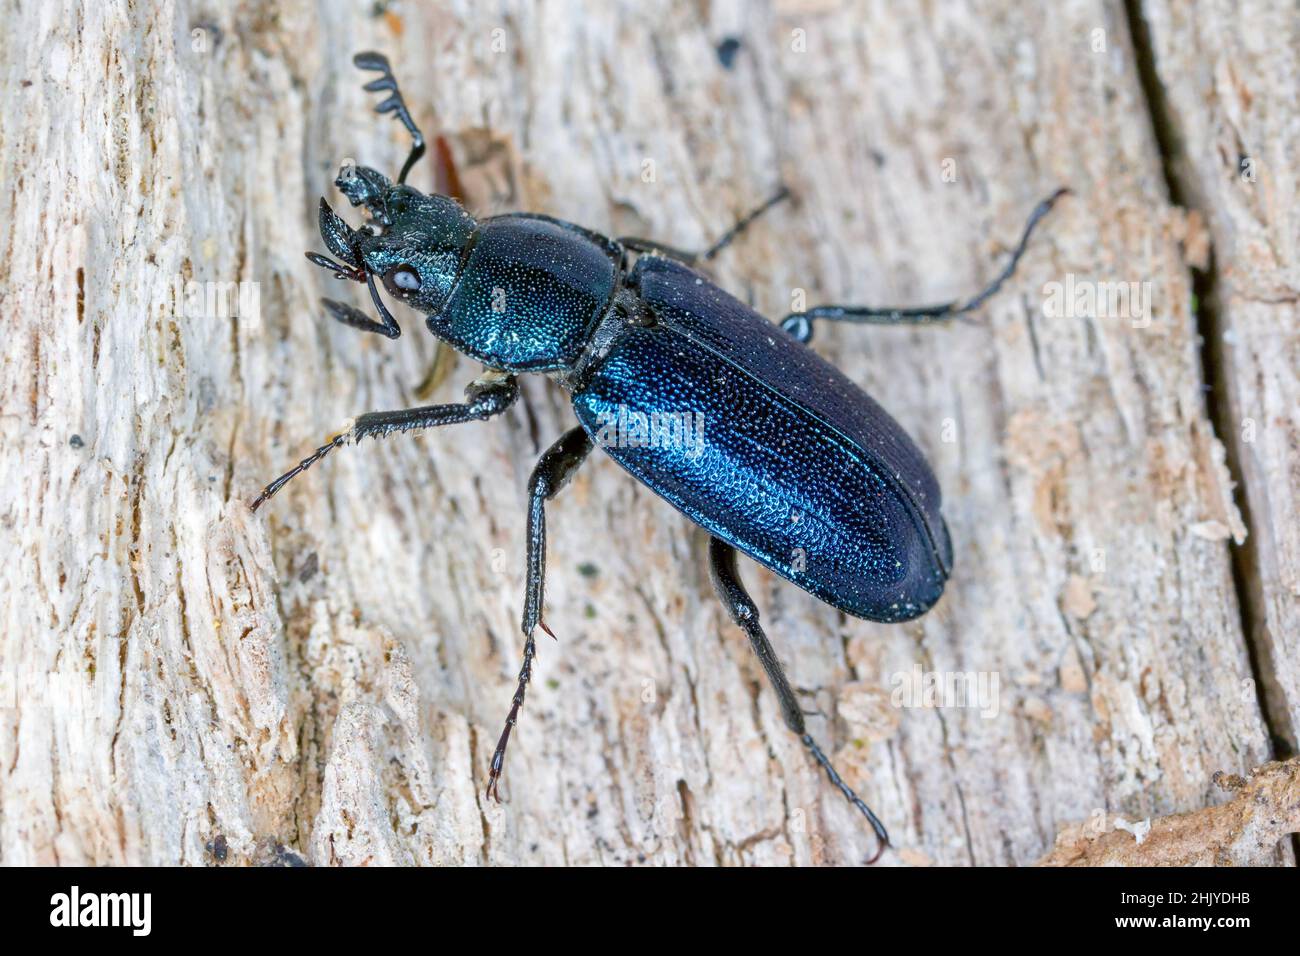 Stag beetle (Lucanidae) - Platycerus caraboides. Stock Photo